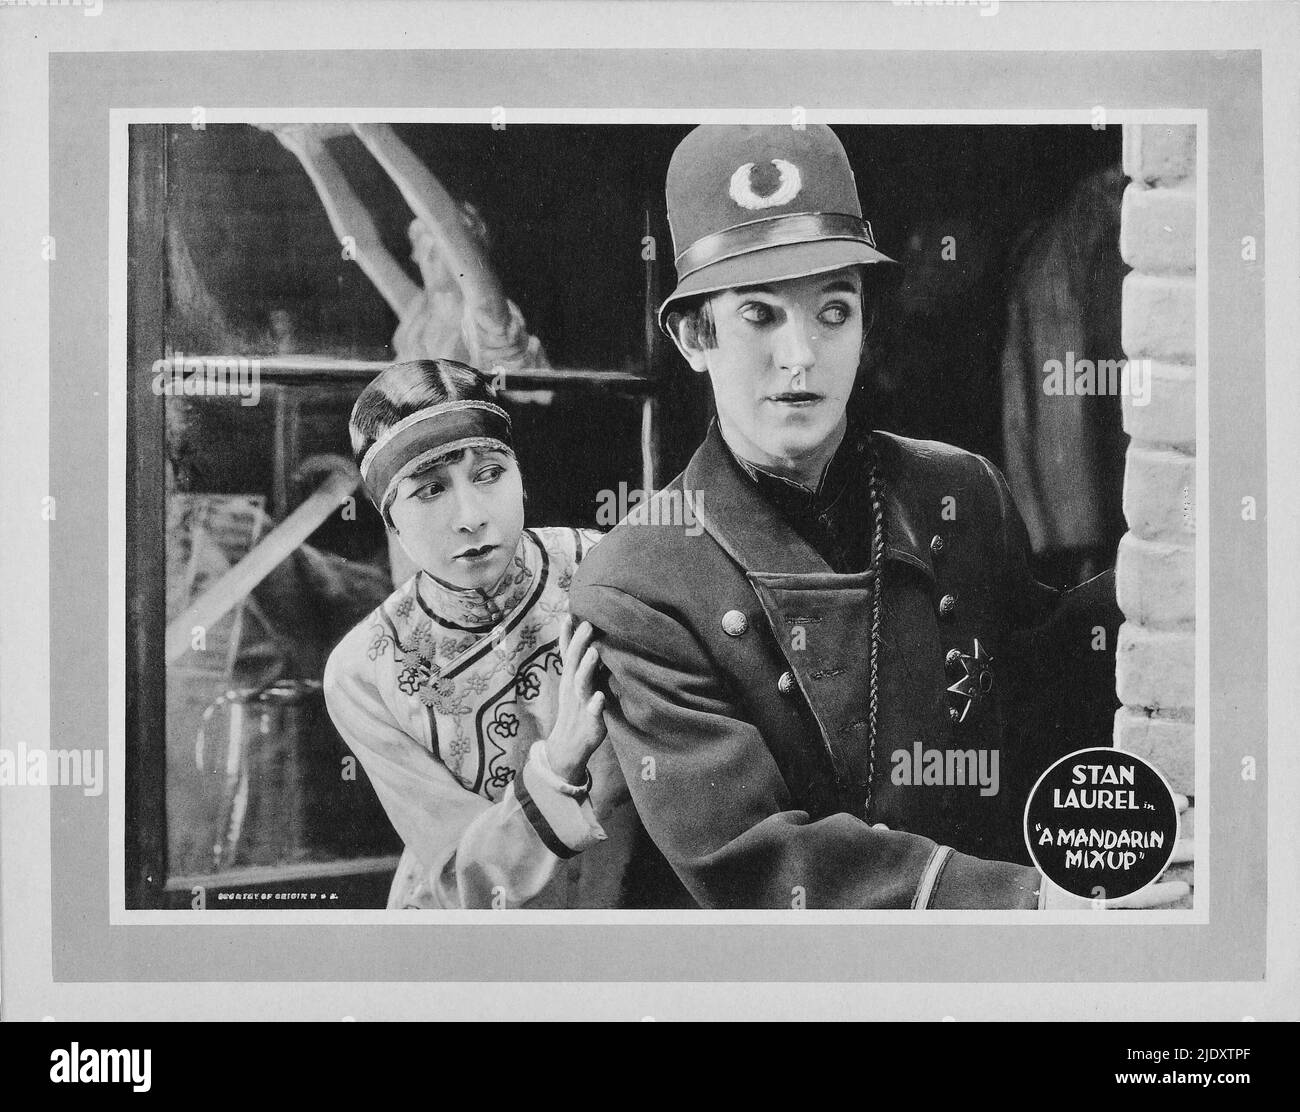 Lobby card for the 1924 short film, A Mandarin Mixup, starring Stan Laurel and Julie Leonard. This is from before Laurel temaed up with Oliver Hardy. Stock Photo